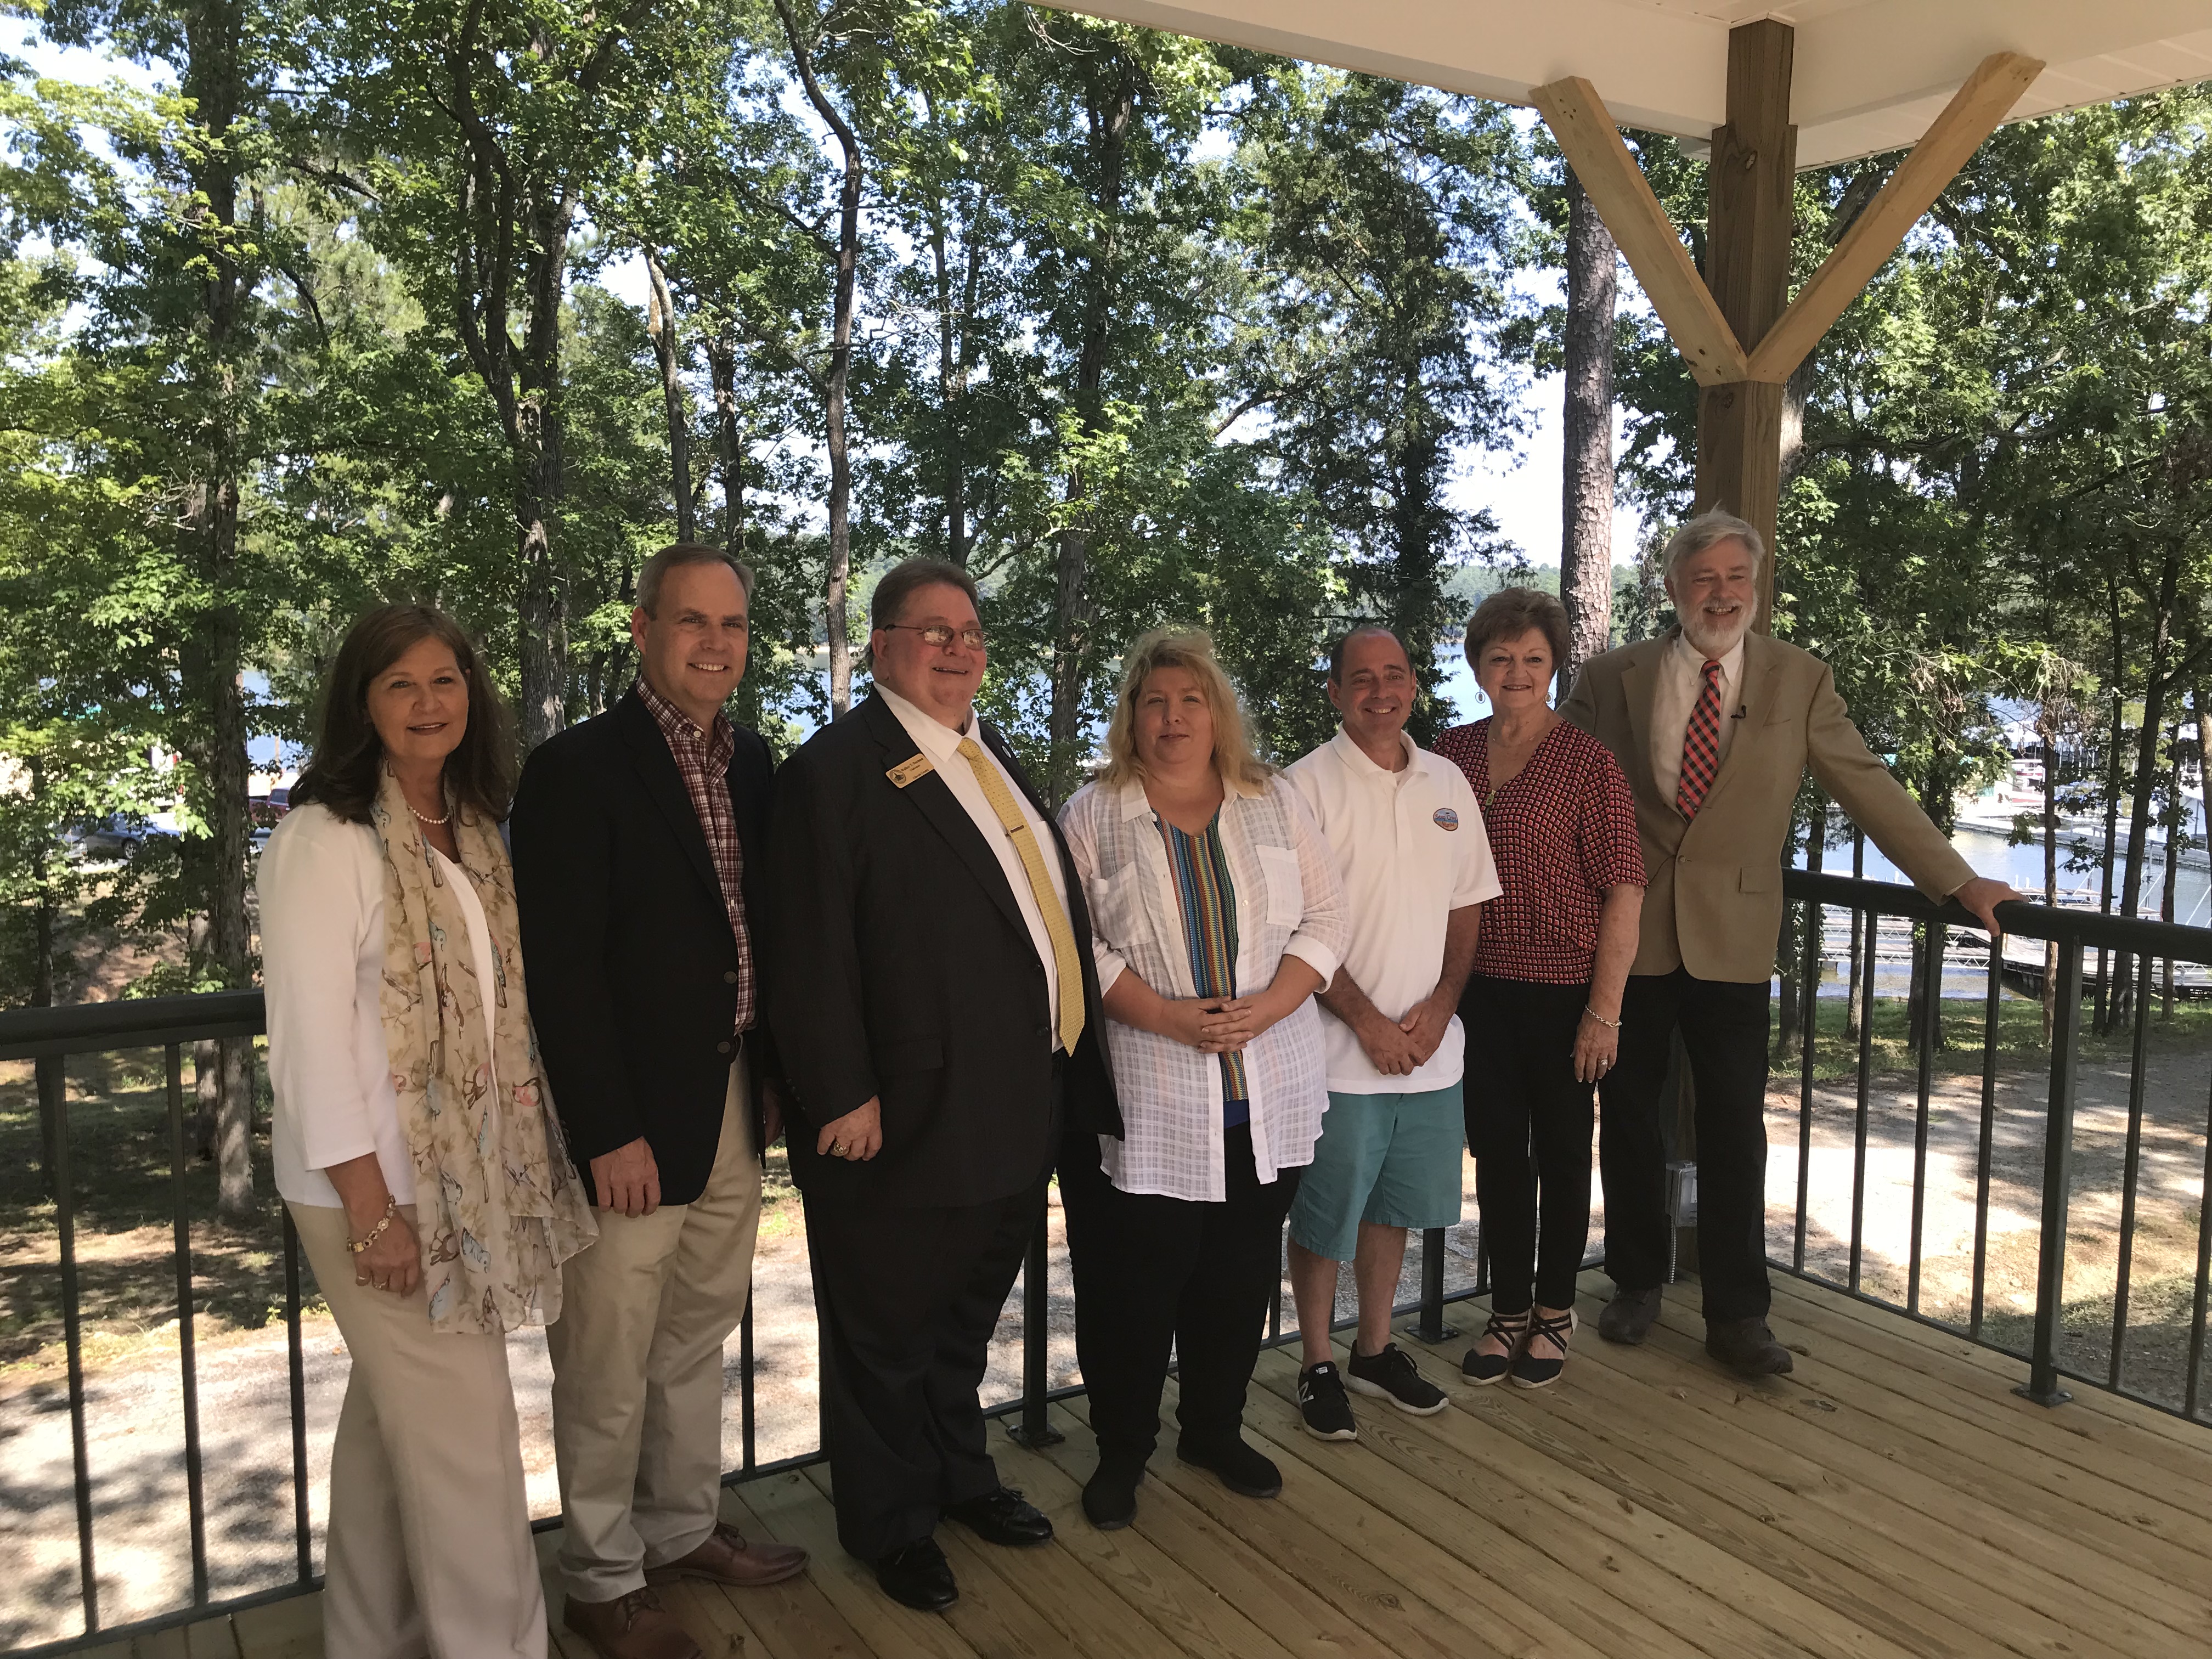 From left, Holly Hunt, DCA Program Manager; Doug Beekman of Enhanced Capital Georgia Rural Fund, LLC; Walker T. Norman, Lincoln County Chairman; Penny Warren, owner of WillieMacs restaurant; Ernie Campbell, Soap Creek Marina and Resort manager; Alana Burke, former Lincoln County Development Authority Executive Director; and John Stone, Executive Director, Lincoln County Economic Development Authority. 